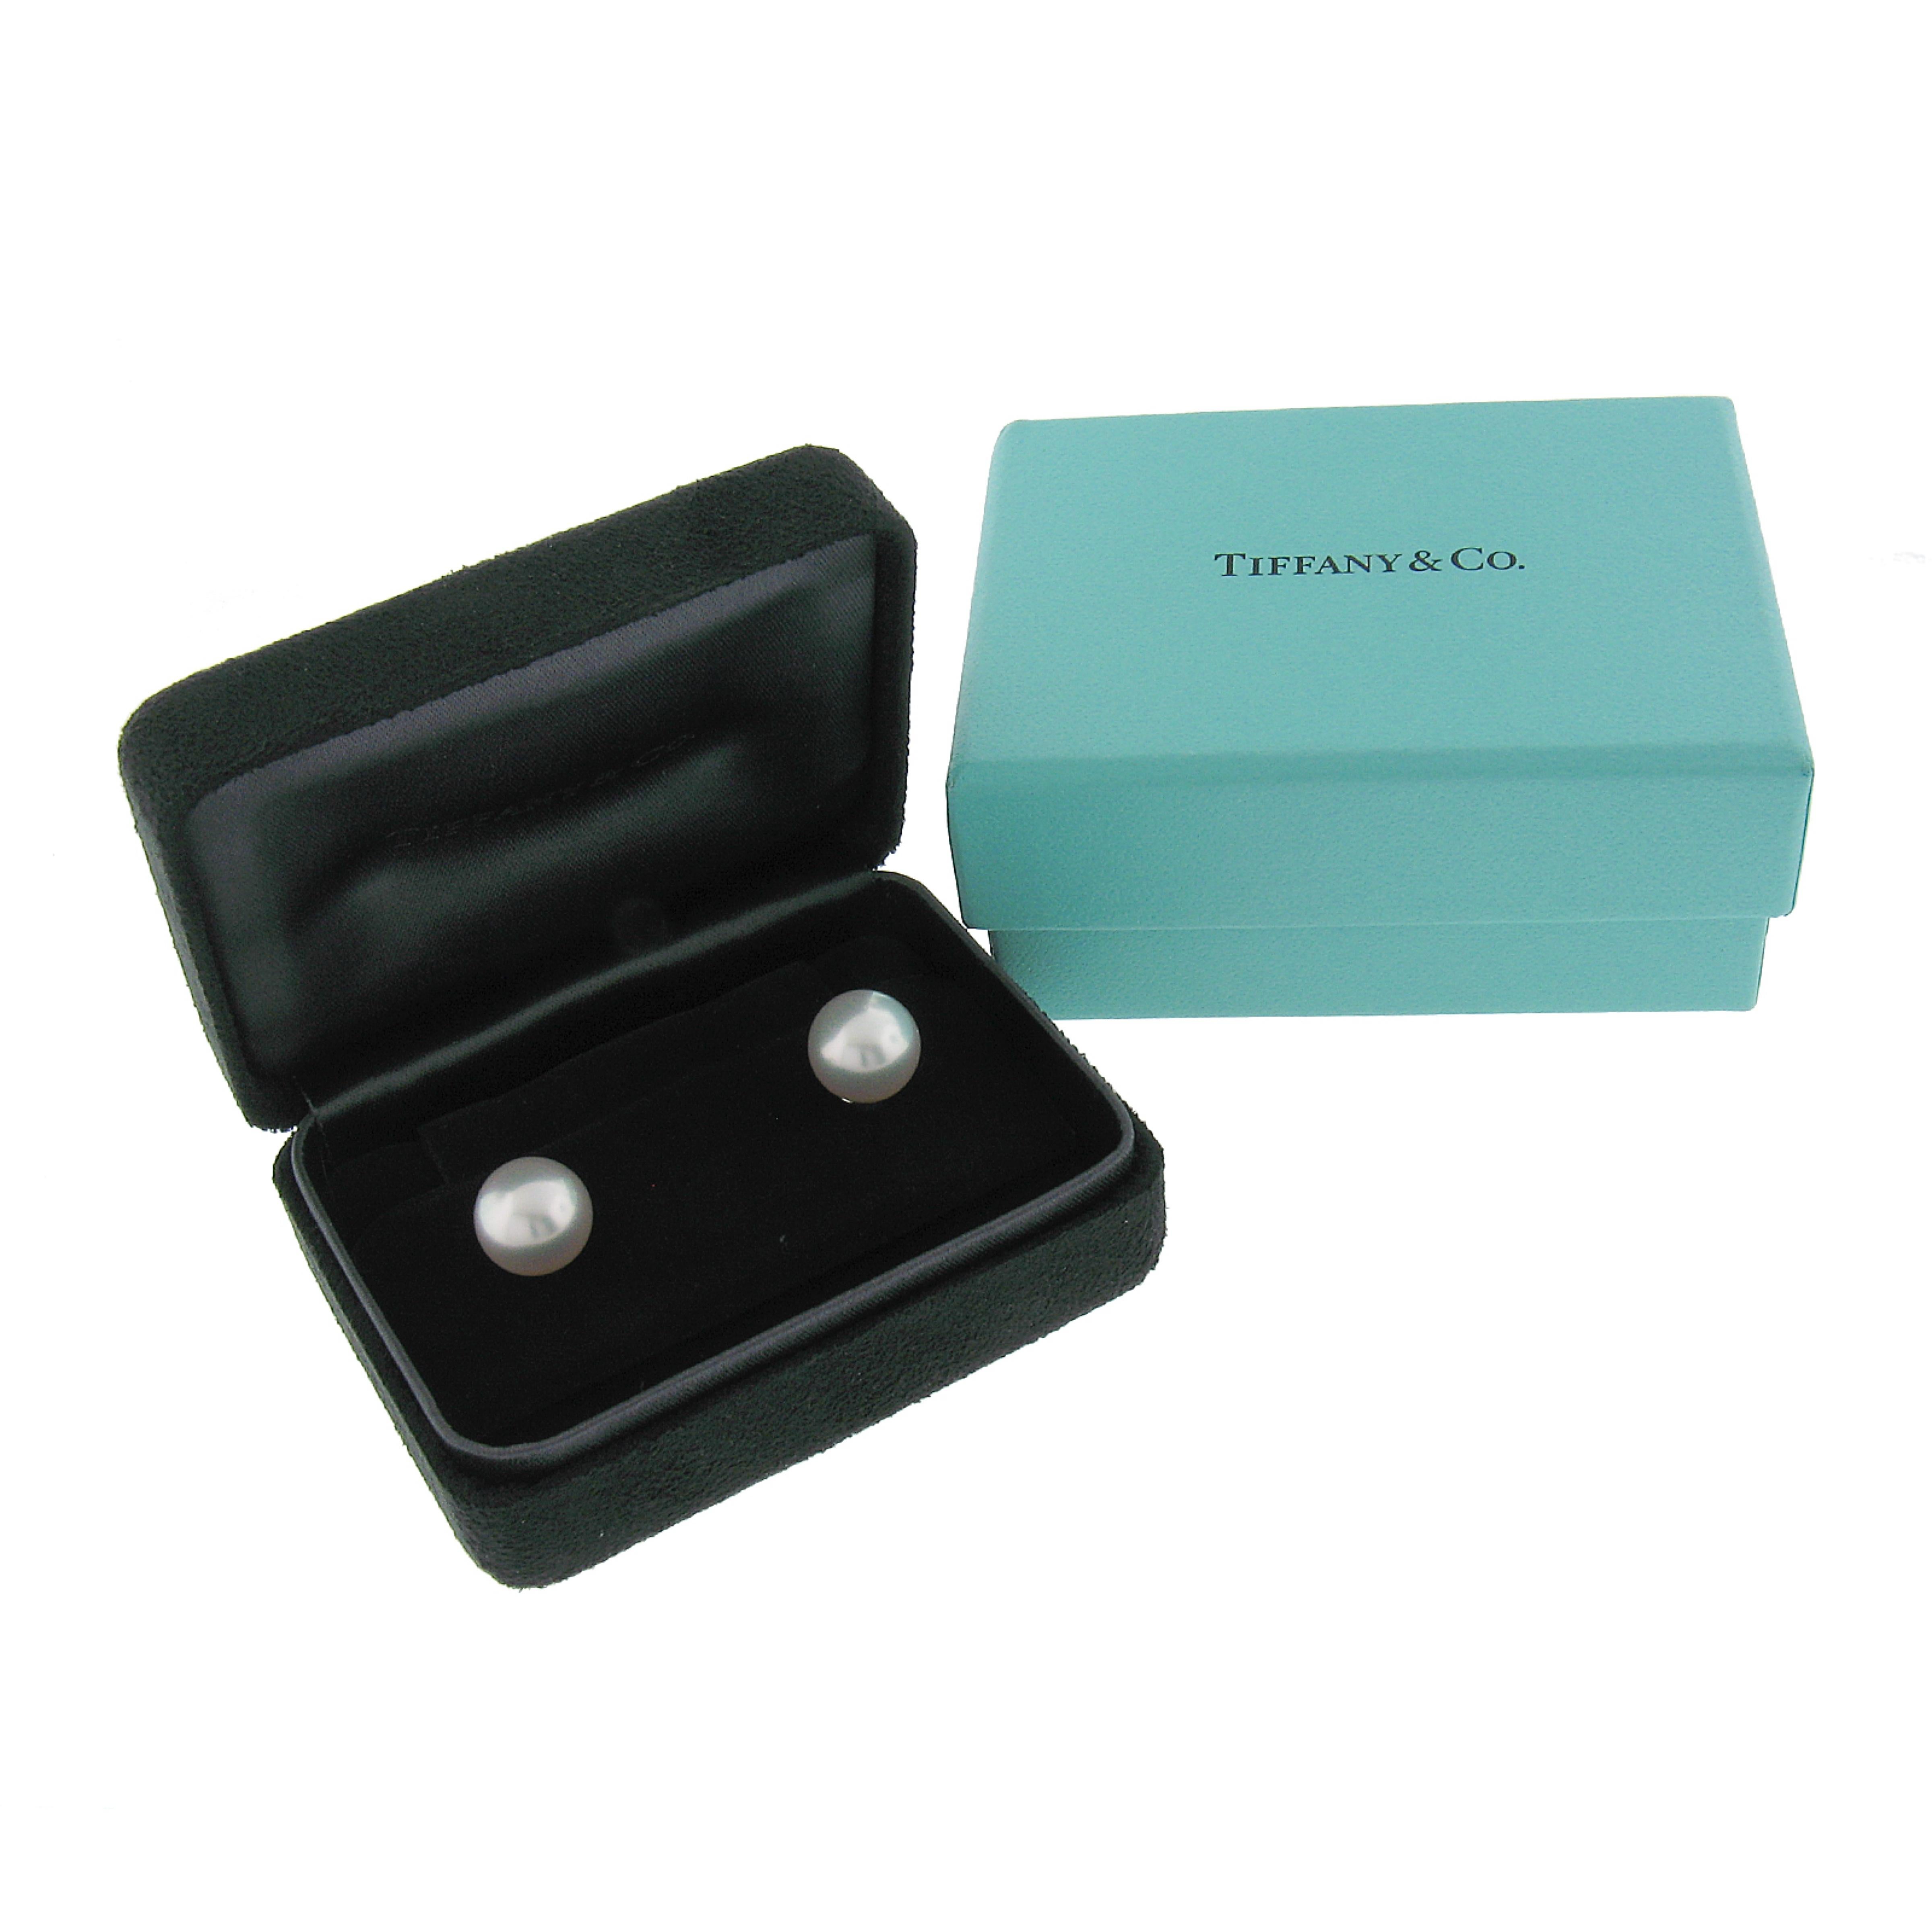 These gorgeous stud earrings by Tiffany & Co. and are crafted in solid platinum and feature an absolutely elegant classic design set with a high quality Akoya cultured pearl at their center. The pearls are very well matched showing an attractive